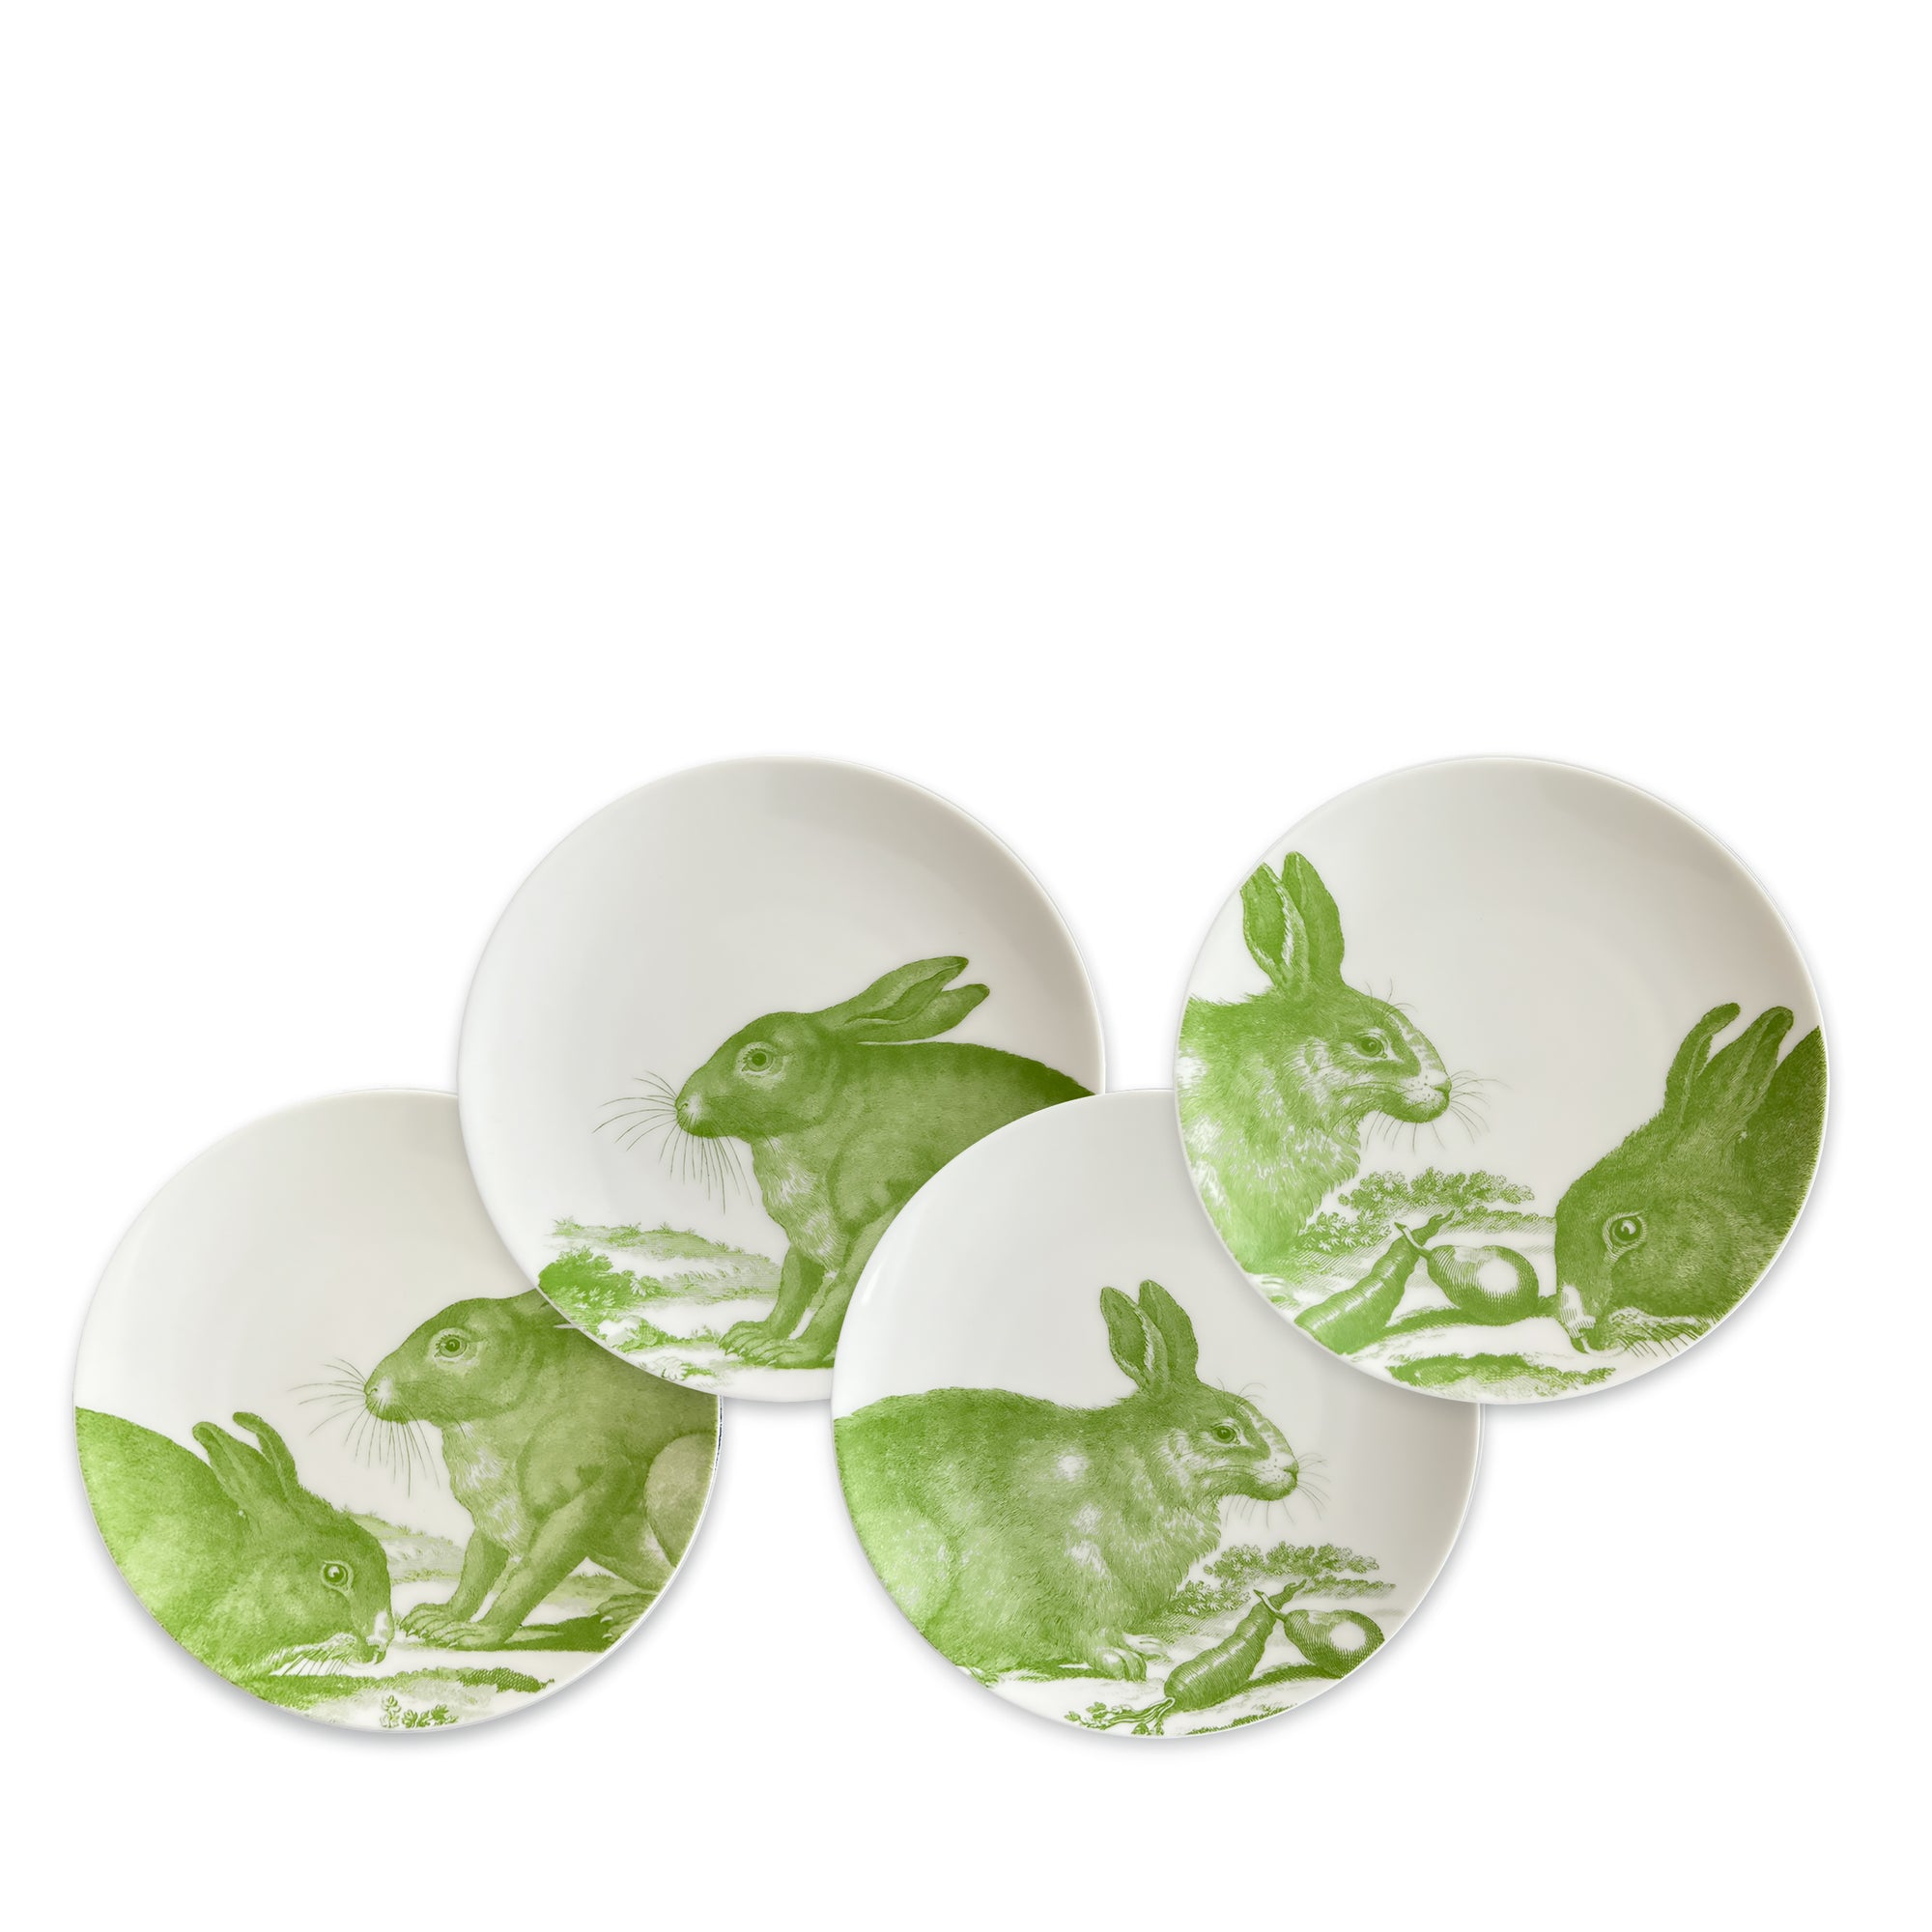 Four white canapé plates feature green illustrations of rabbits in various poses, creating a charming bunny scene. These **Bunnies Verde Small Plates** by **Caskata** make for a delightful addition to any table setting.